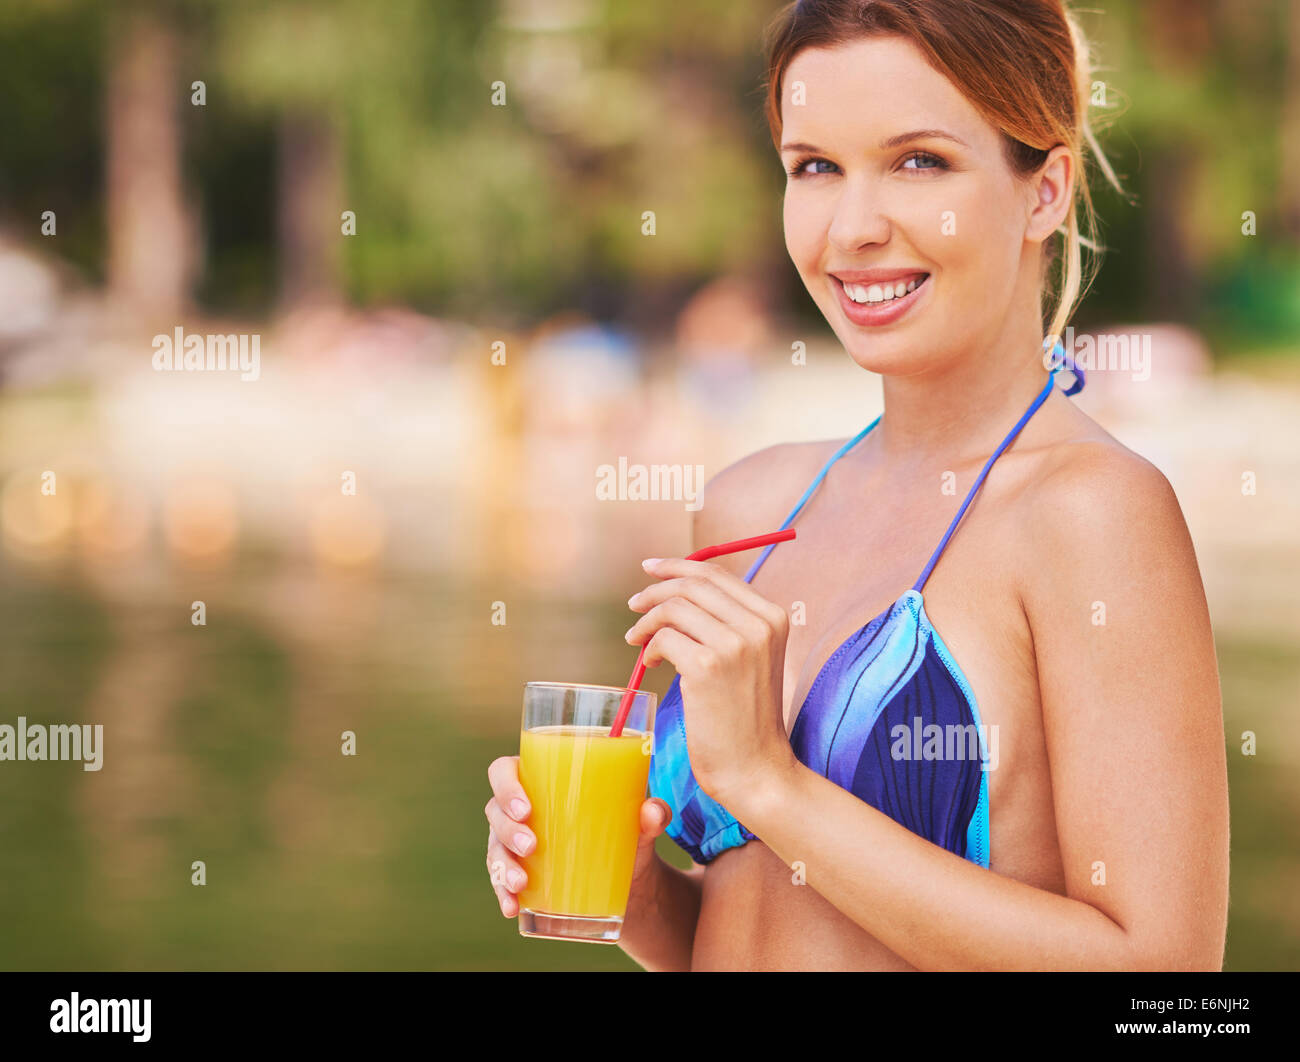 Young woman in bikini with juice looking at camera and smiling Stock Photo